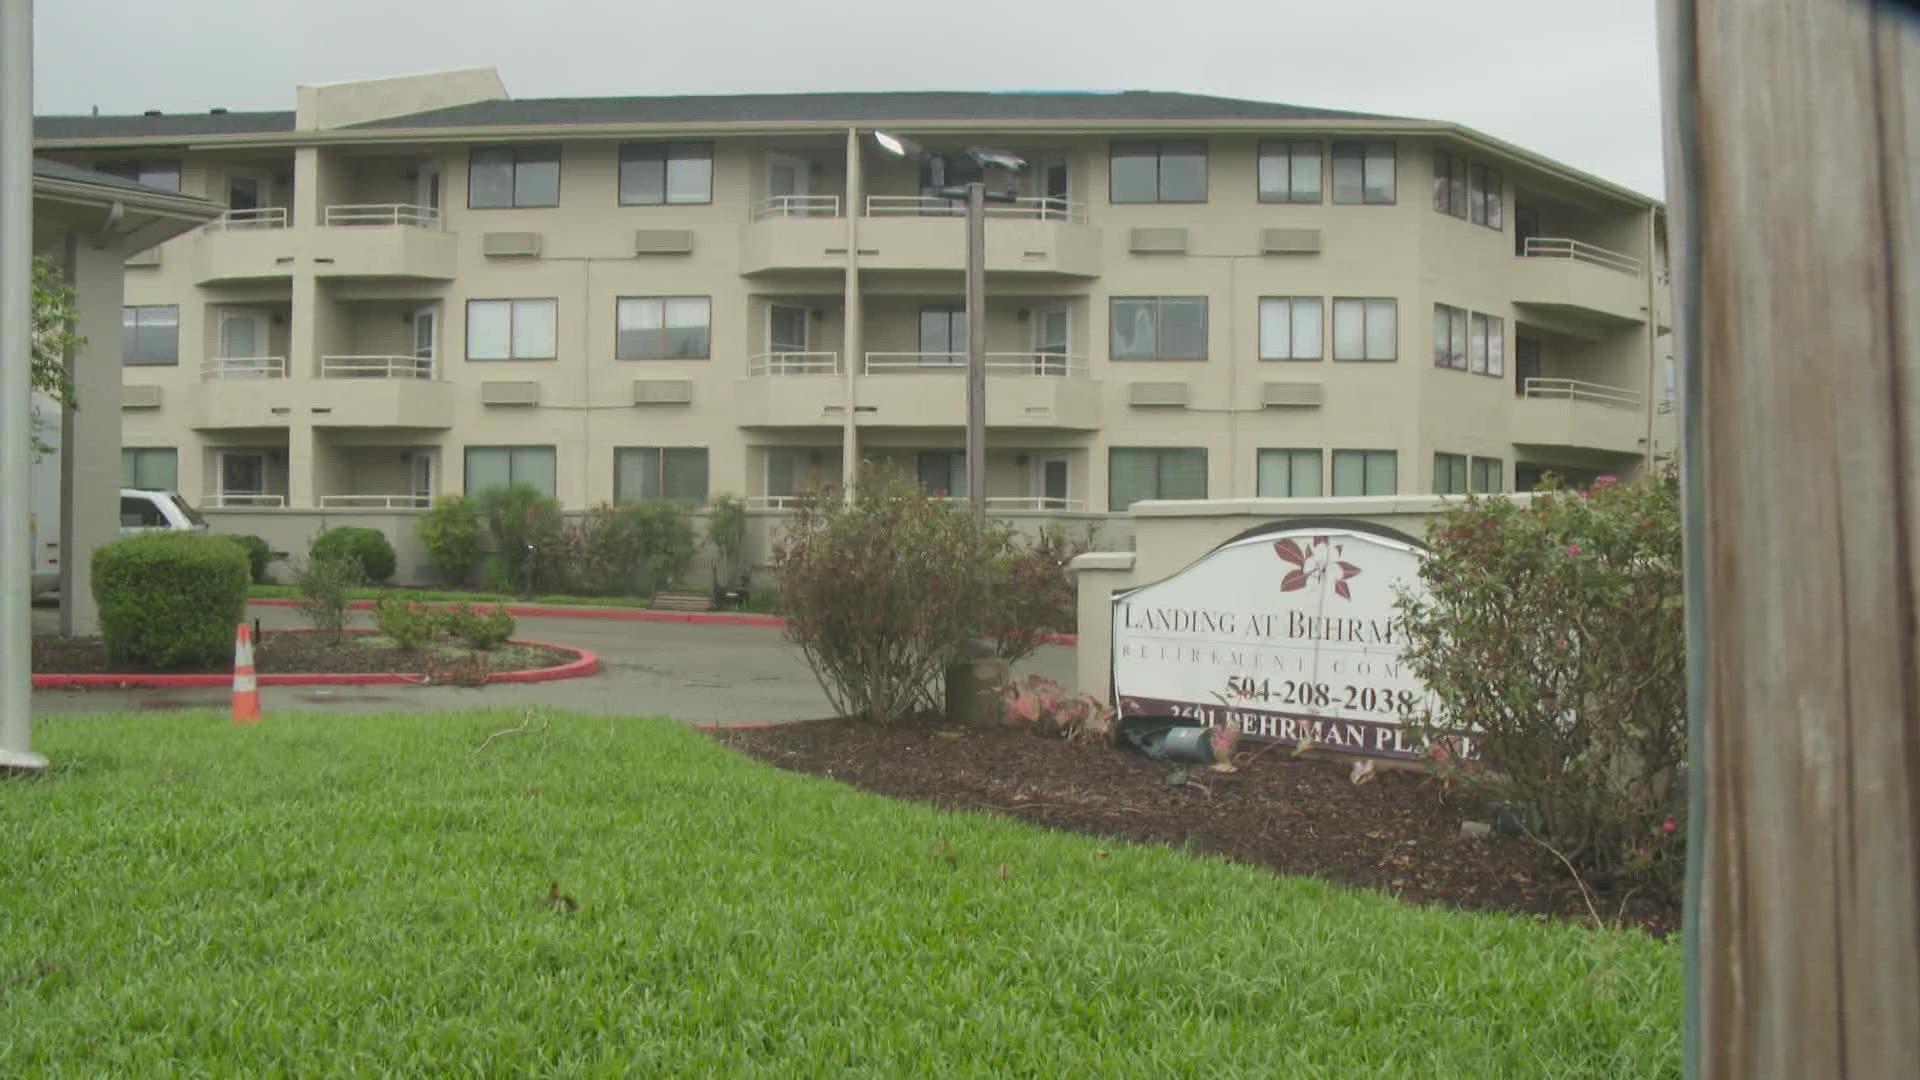 Residents in a senior living facility are being force out of the homes they know after hurricane Ida deemed their facility unlivable.